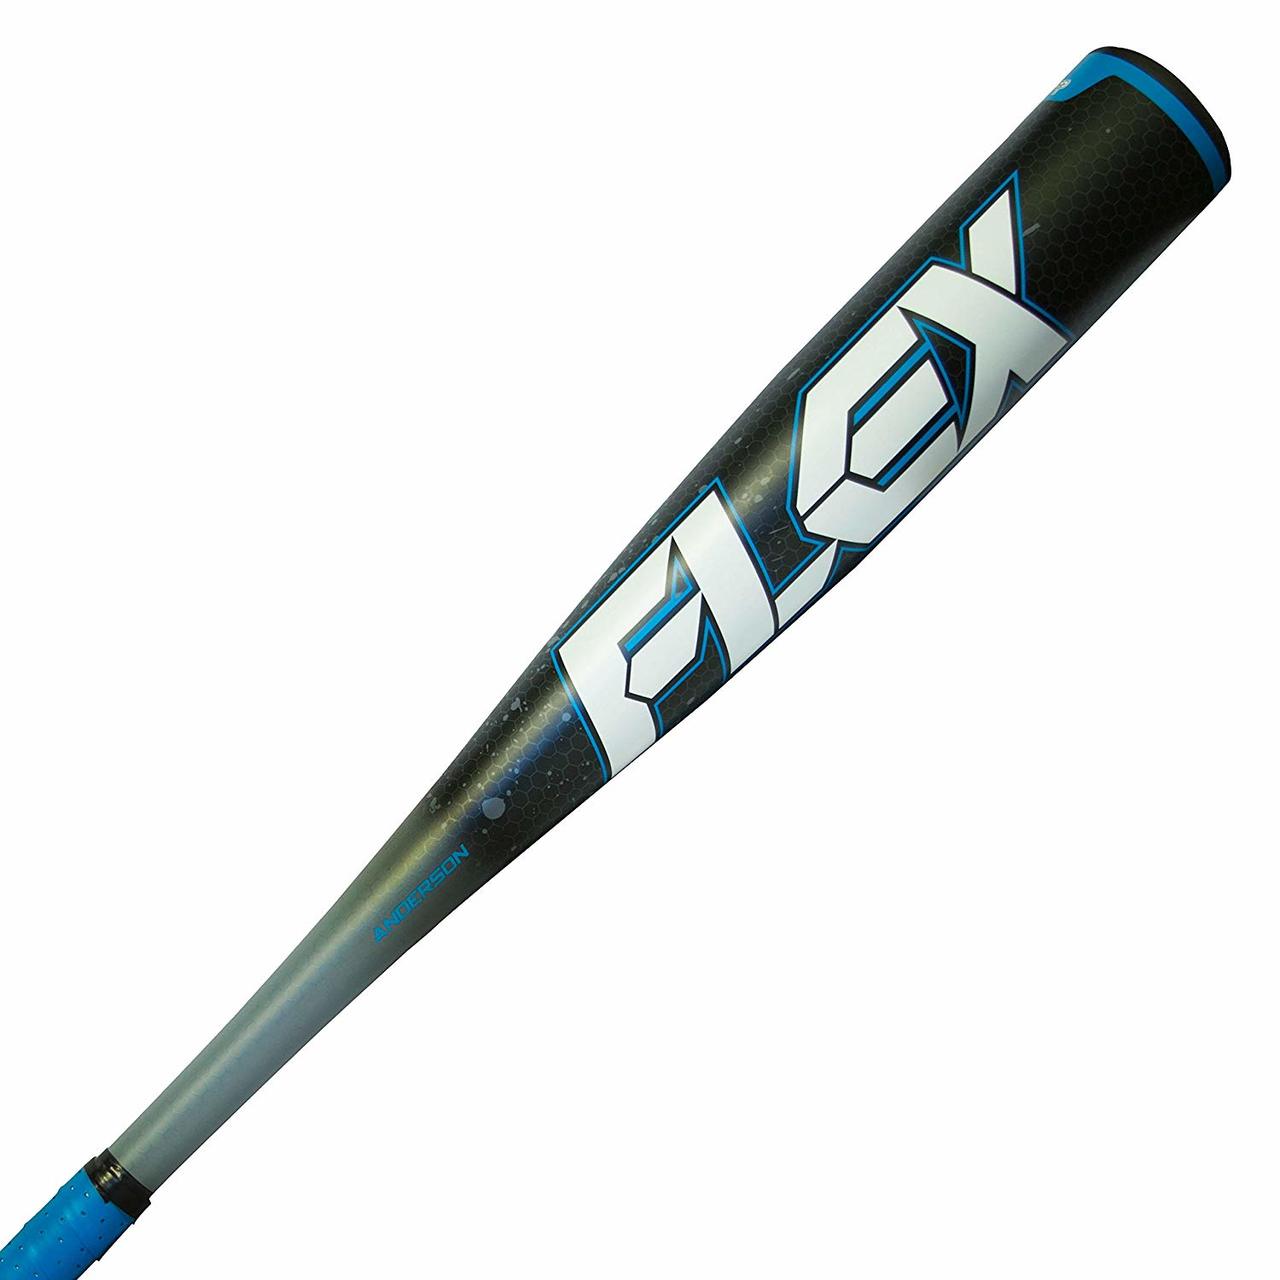 anderson-flex-bbcor-baseball-bat-3oz-014016-32-inch-29-oz 014016-3229 Anderson 874147008713 <p>Type a description for this product here...</p>    